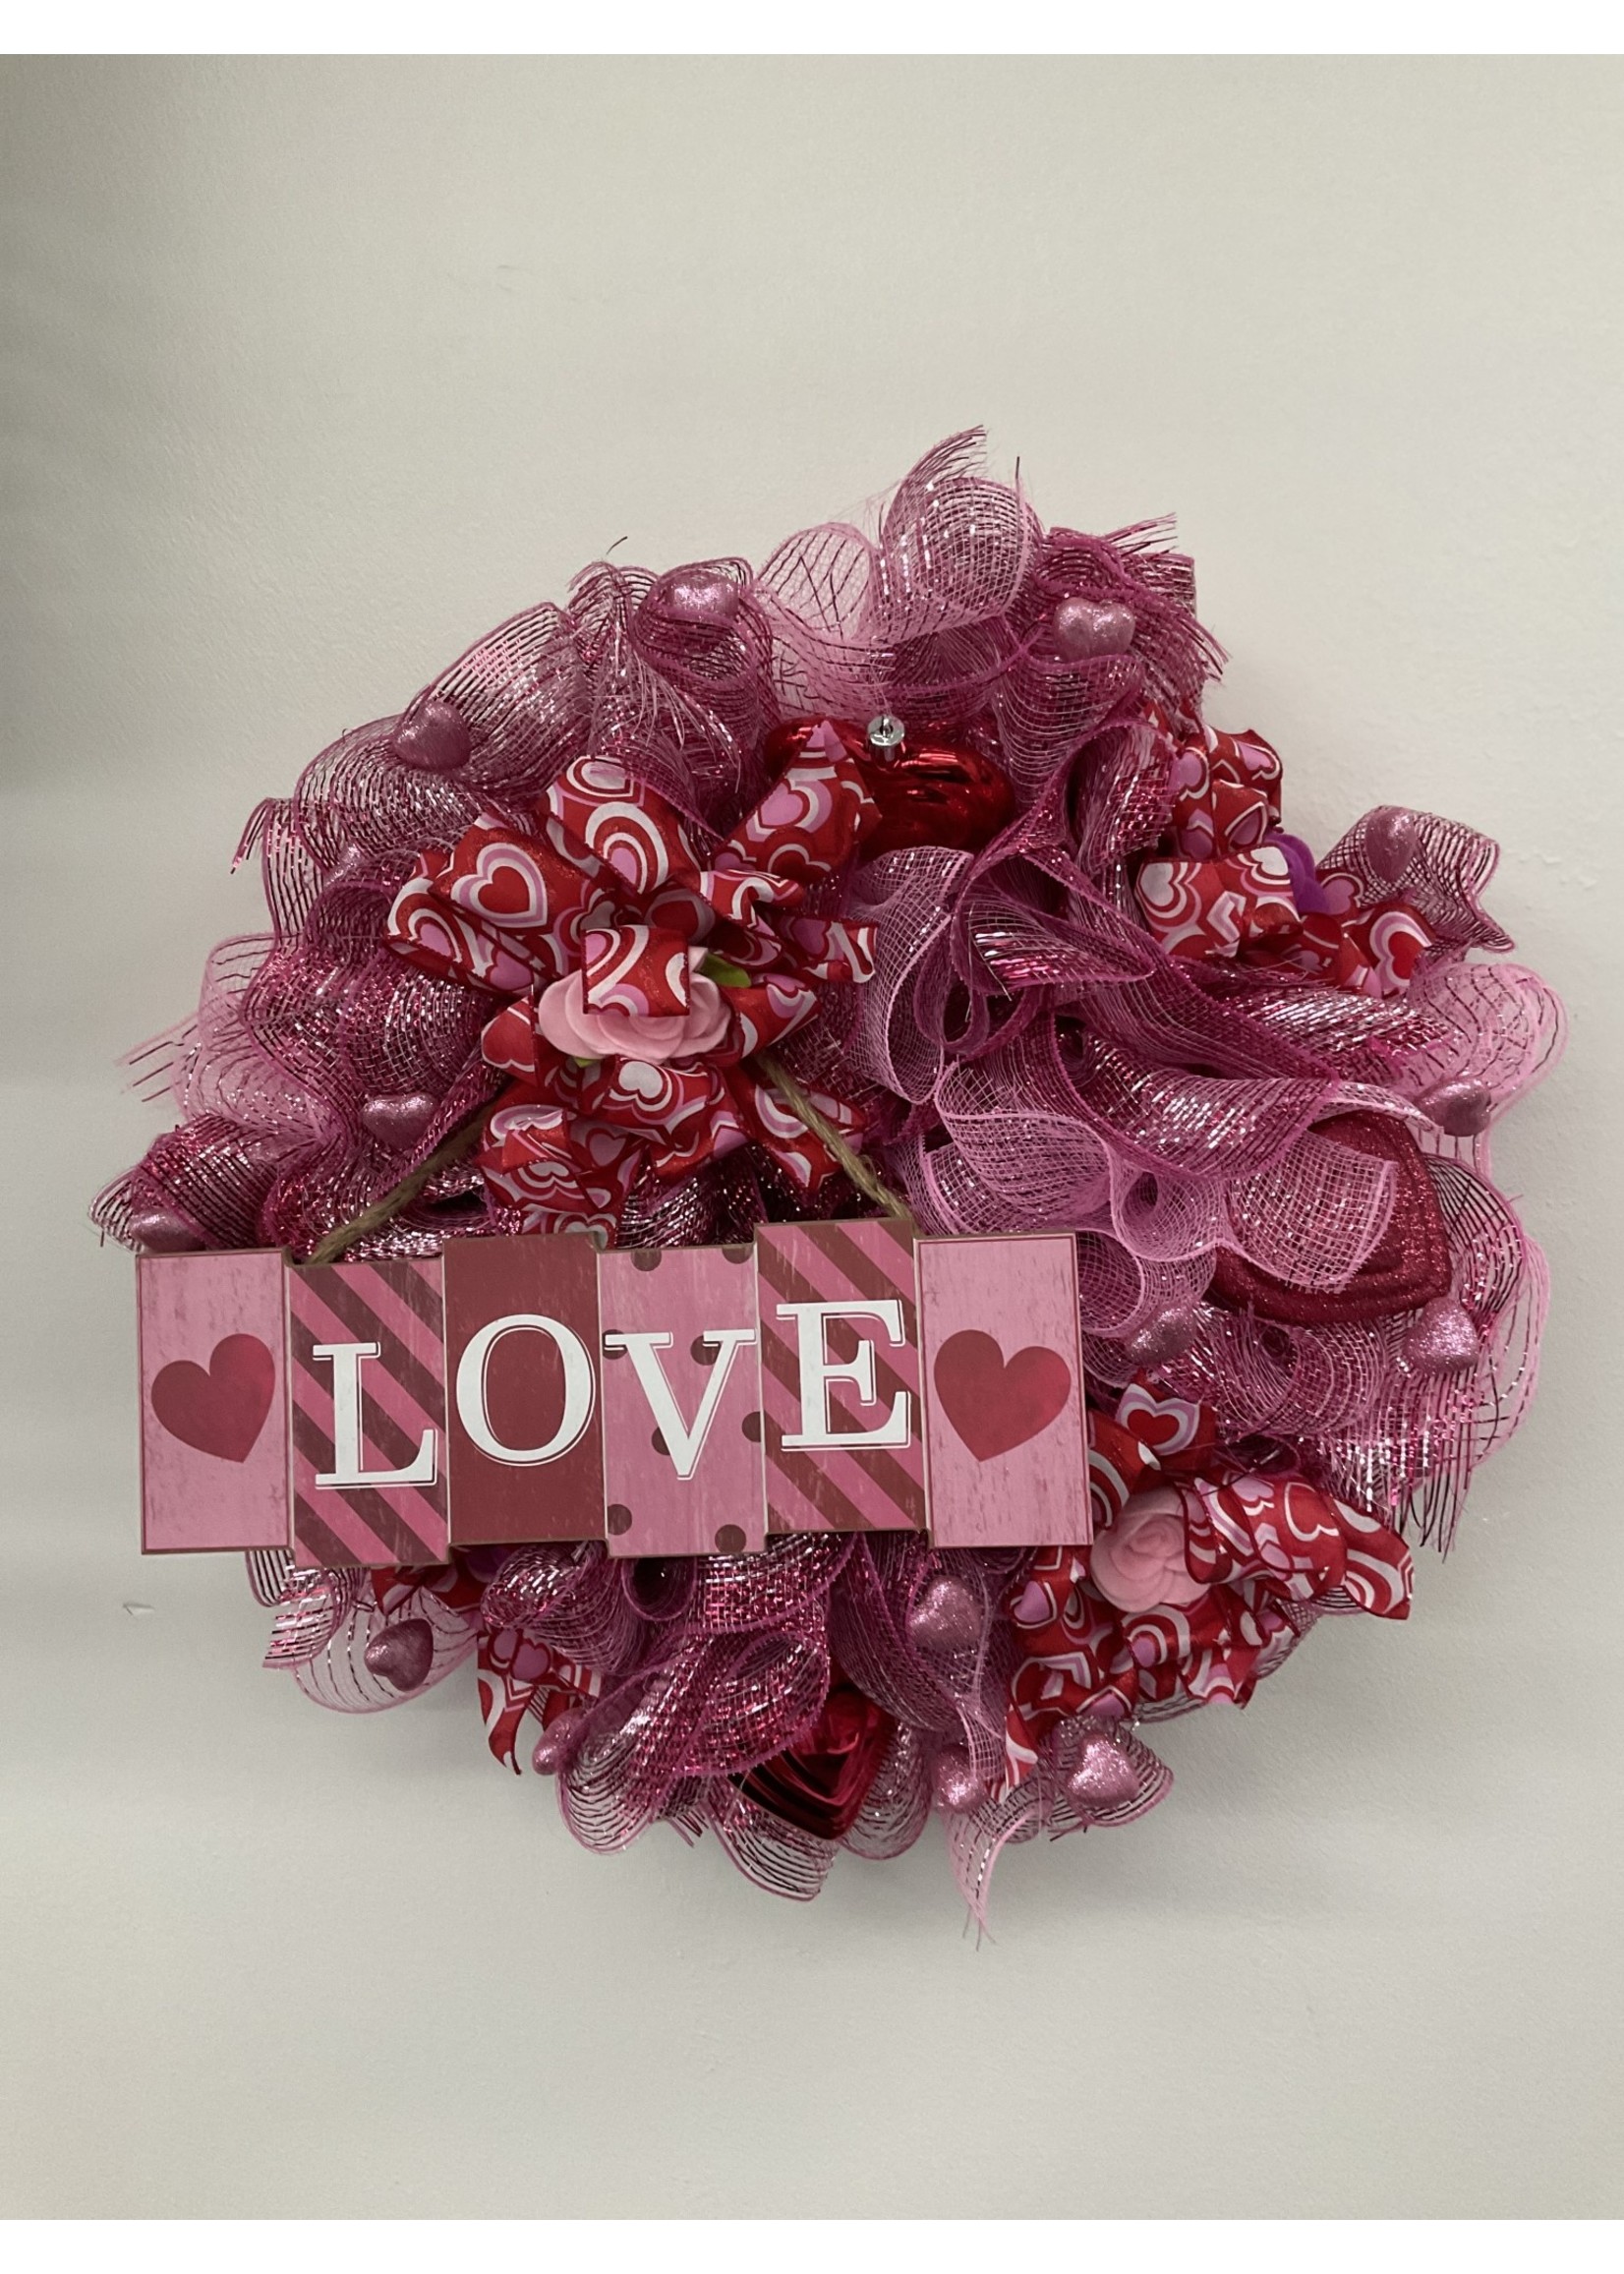 My New Favorite Thing Wreath Mesh Pink and Red "Love" with Red Hearts, Pink Flowers and Heart Ribbon